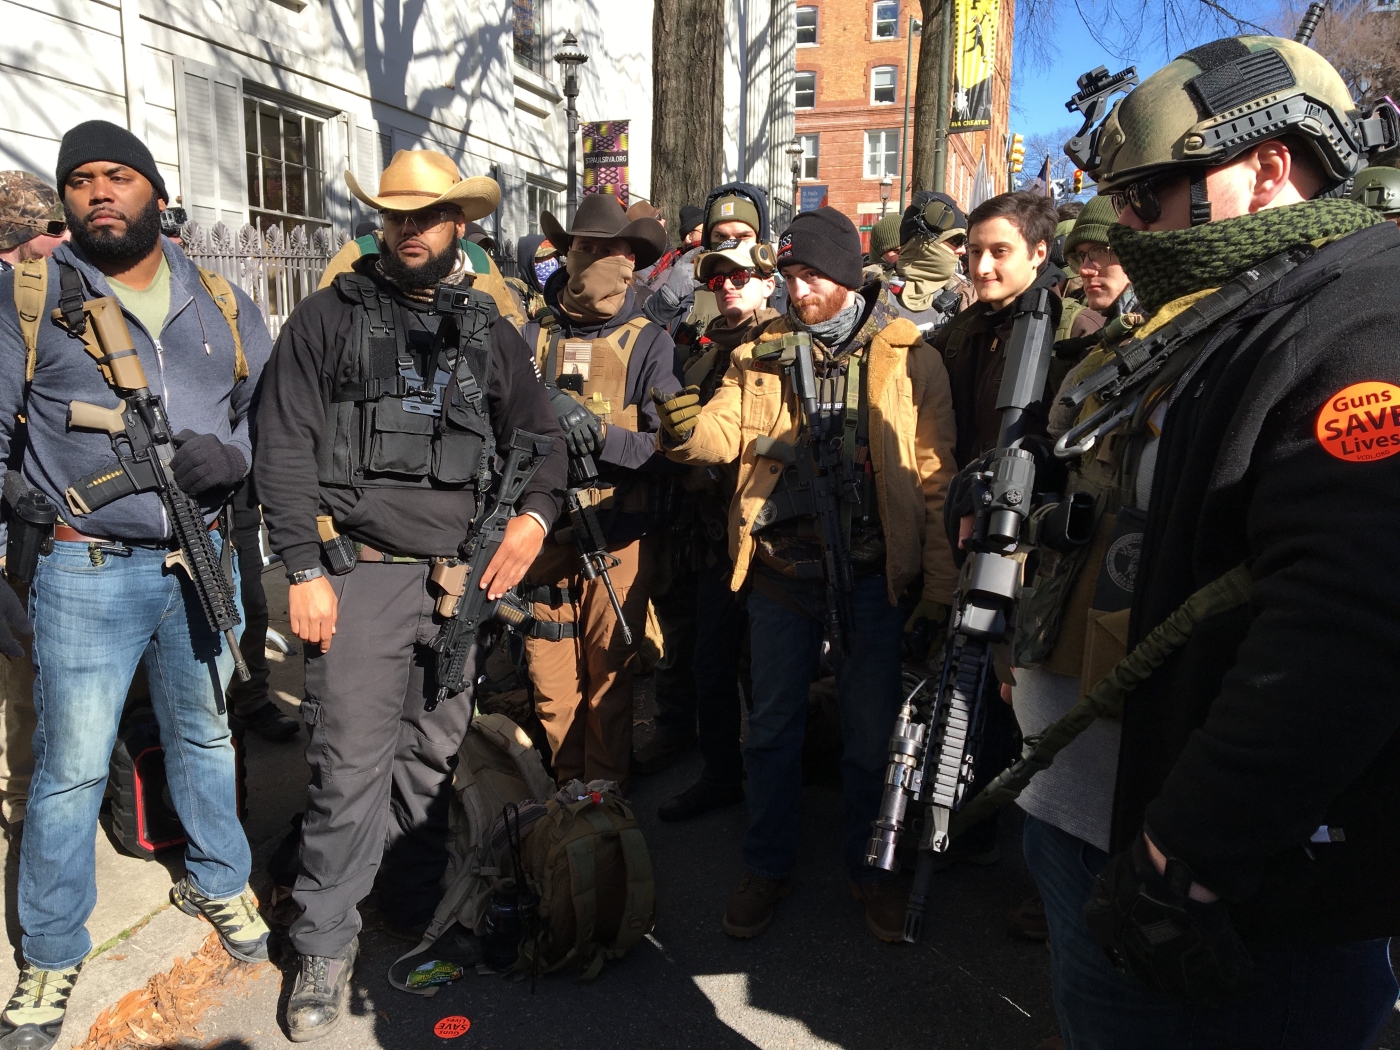 Virginia gun rights rally attracts massive American militia turnout | Middle East Eye